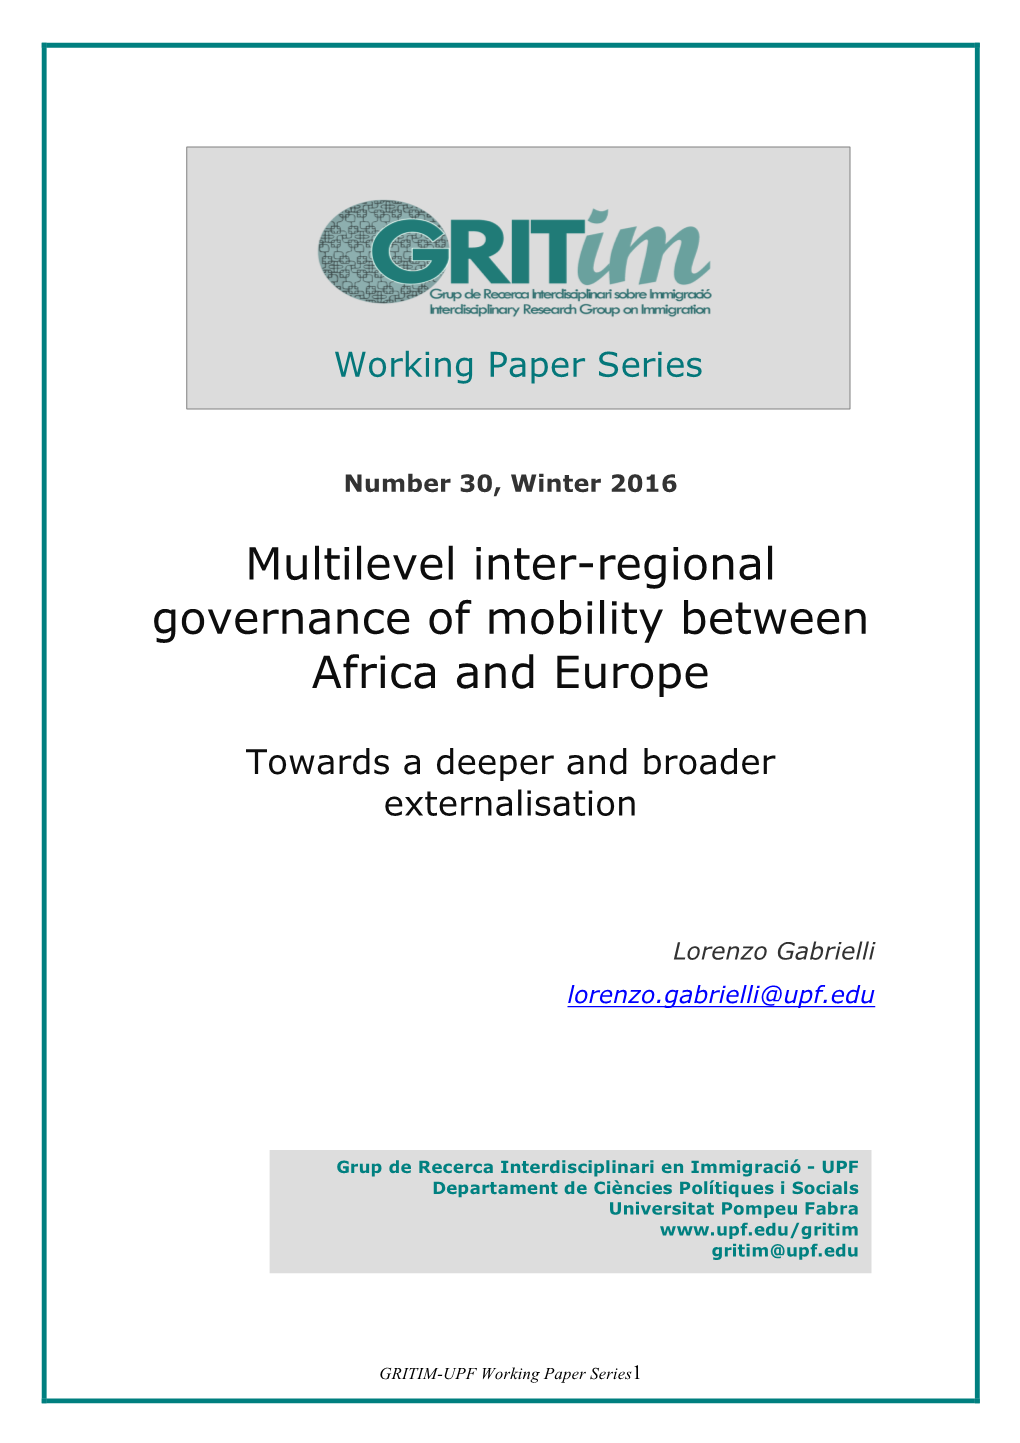 Multilevel Inter-Regional Governance of Mobility Between Africa and Europe